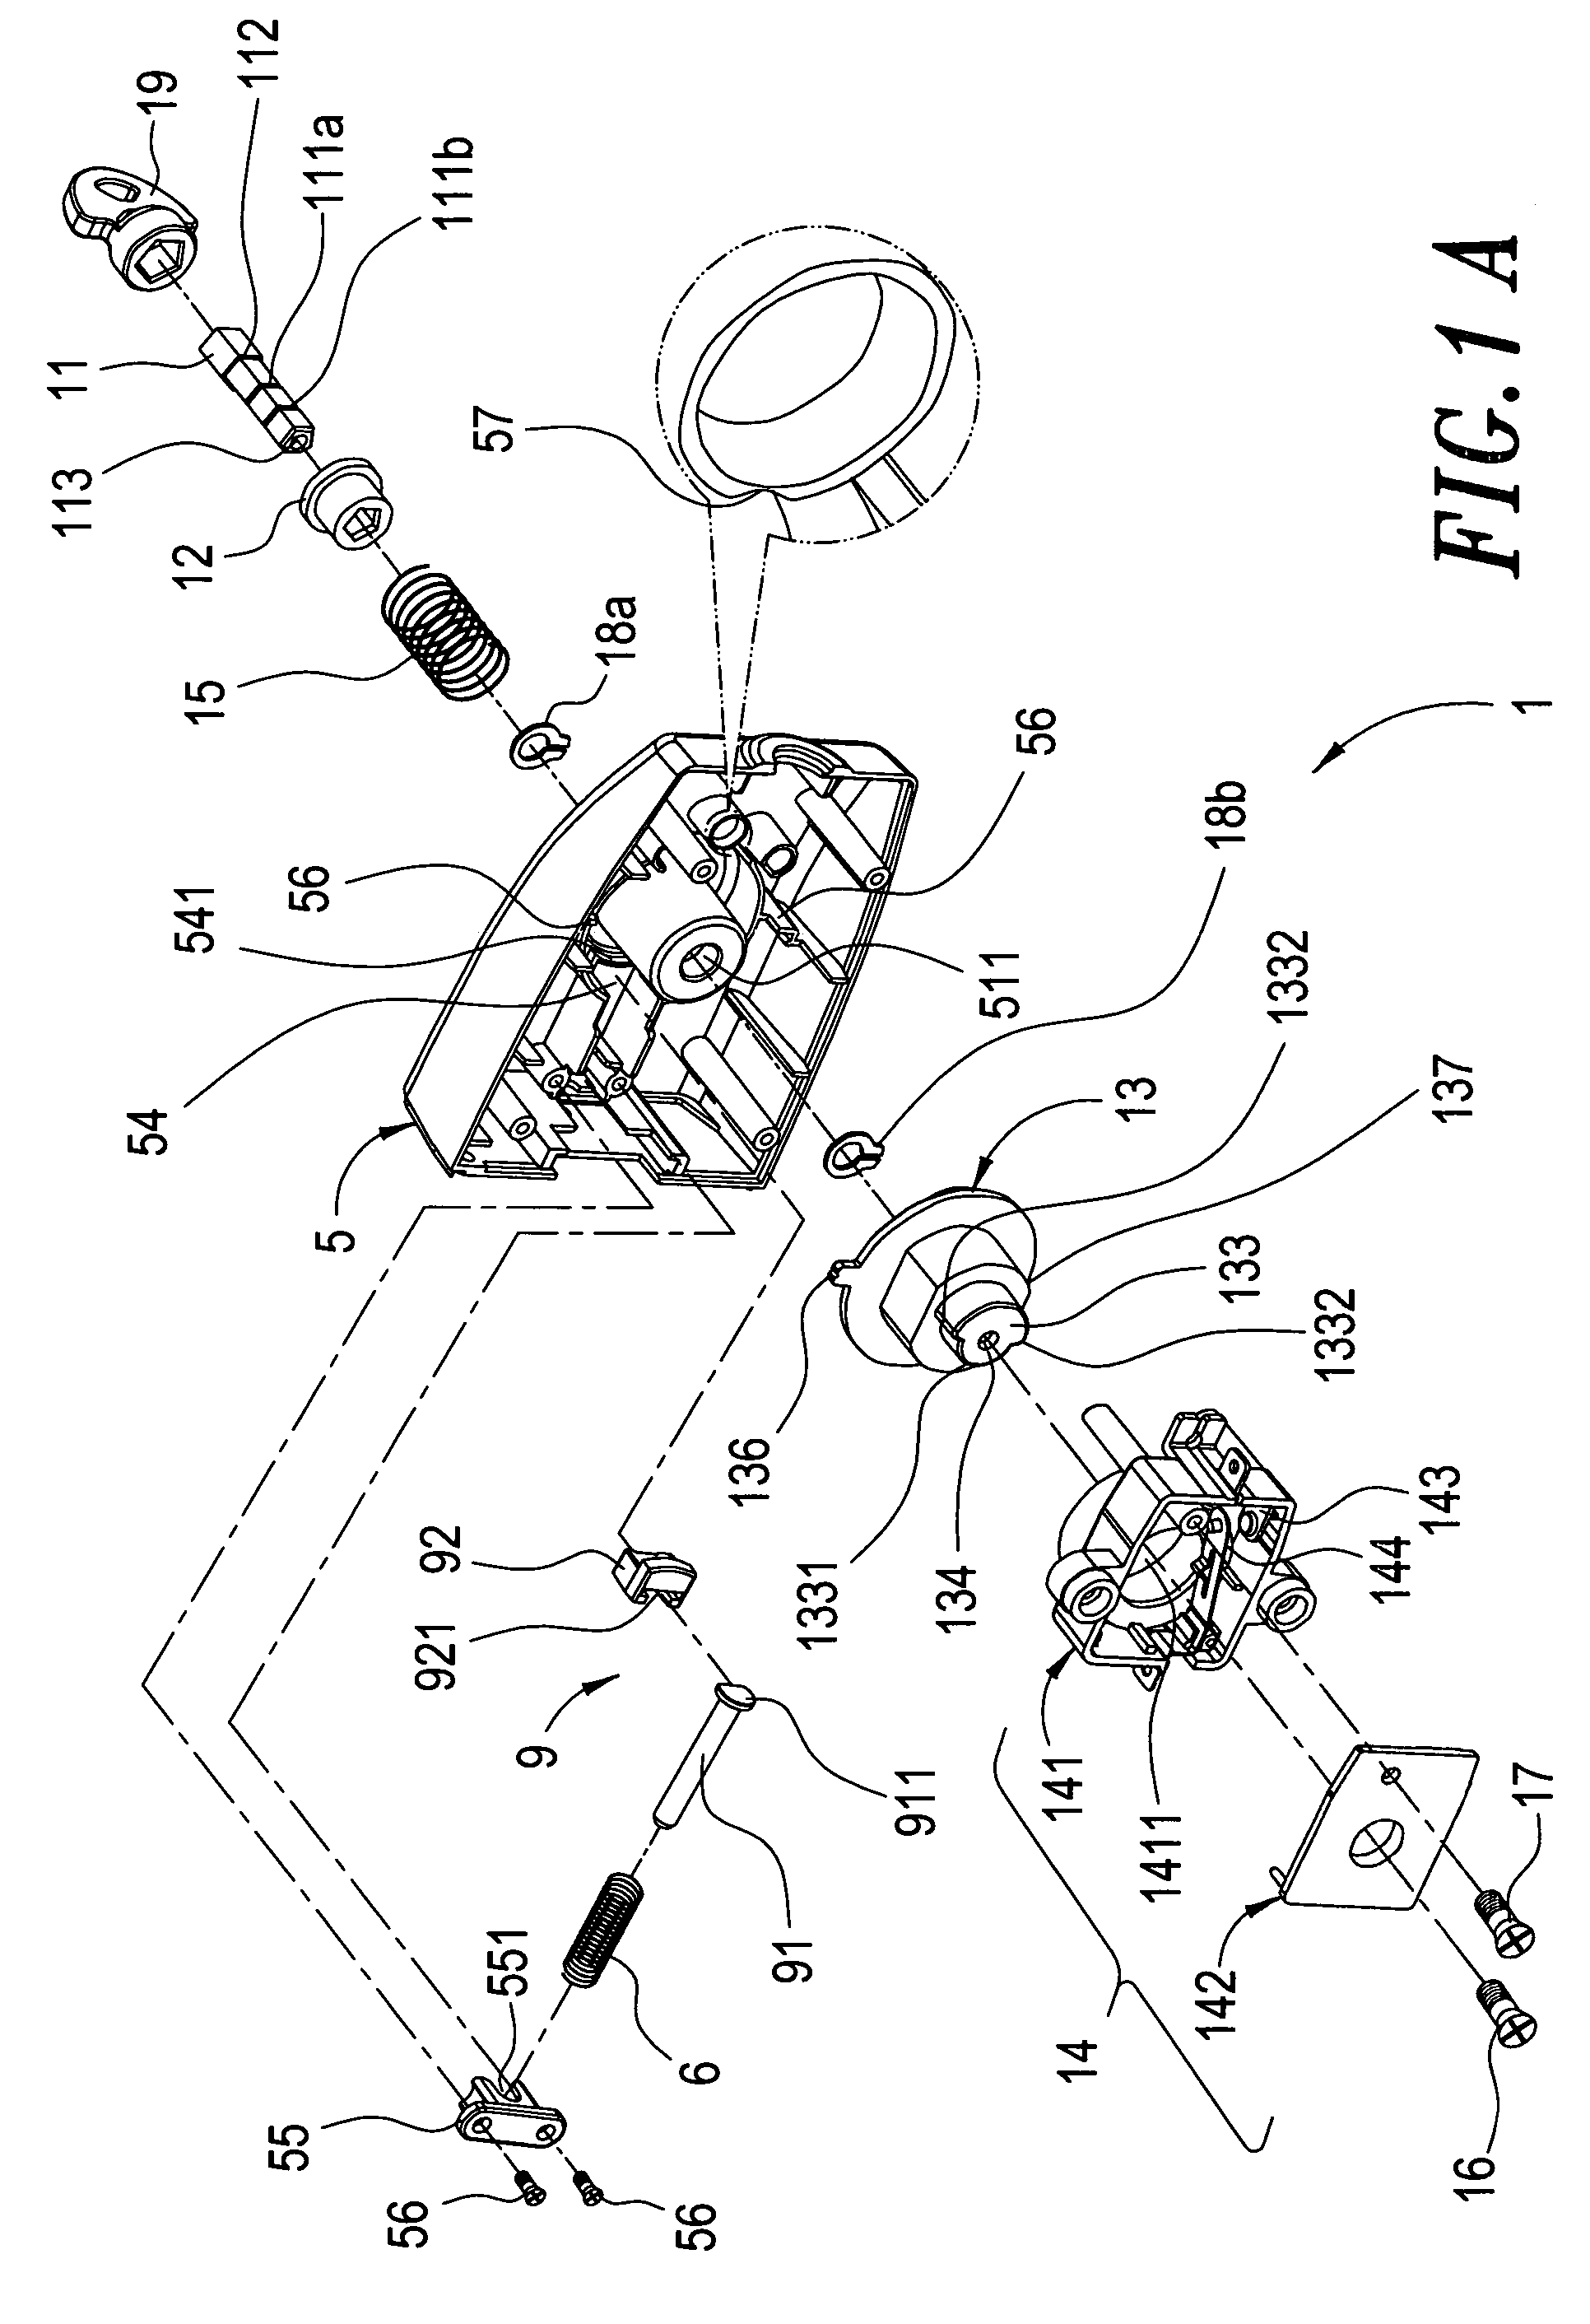 Socket power supply control structure